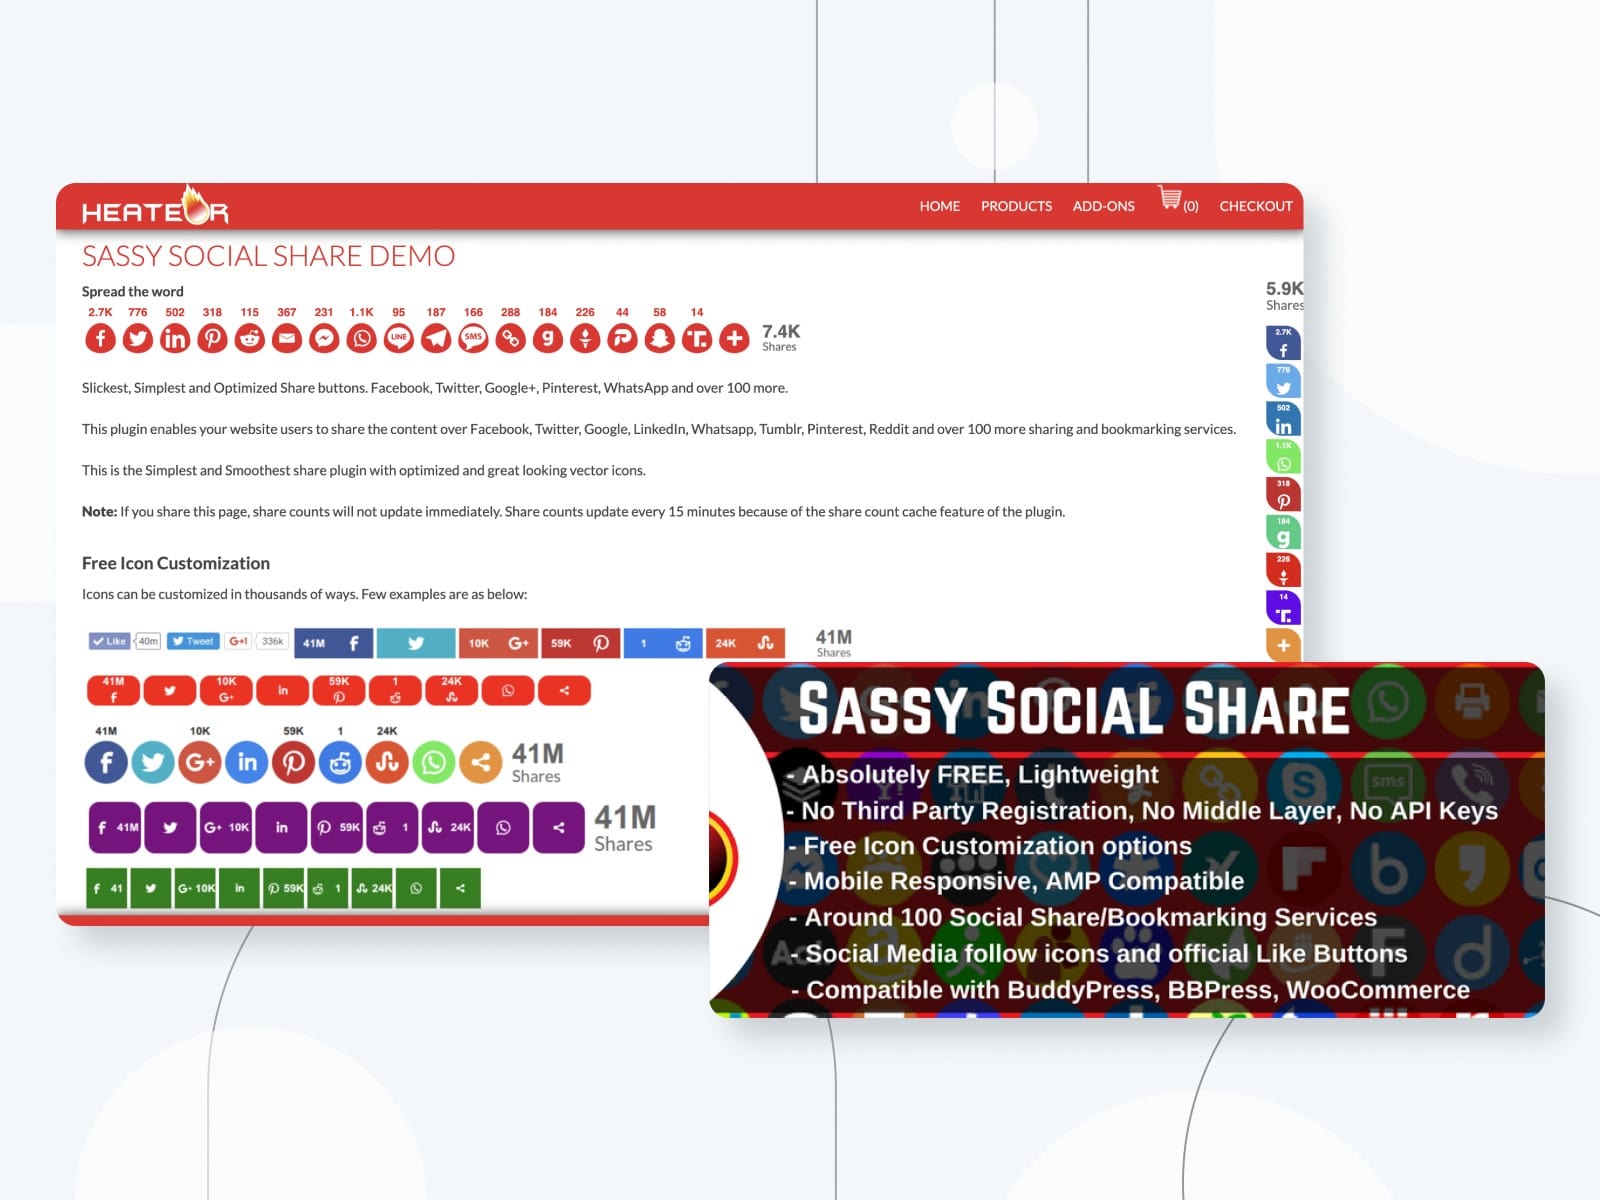 The Sassy Social Share plugin for adding social share icons.